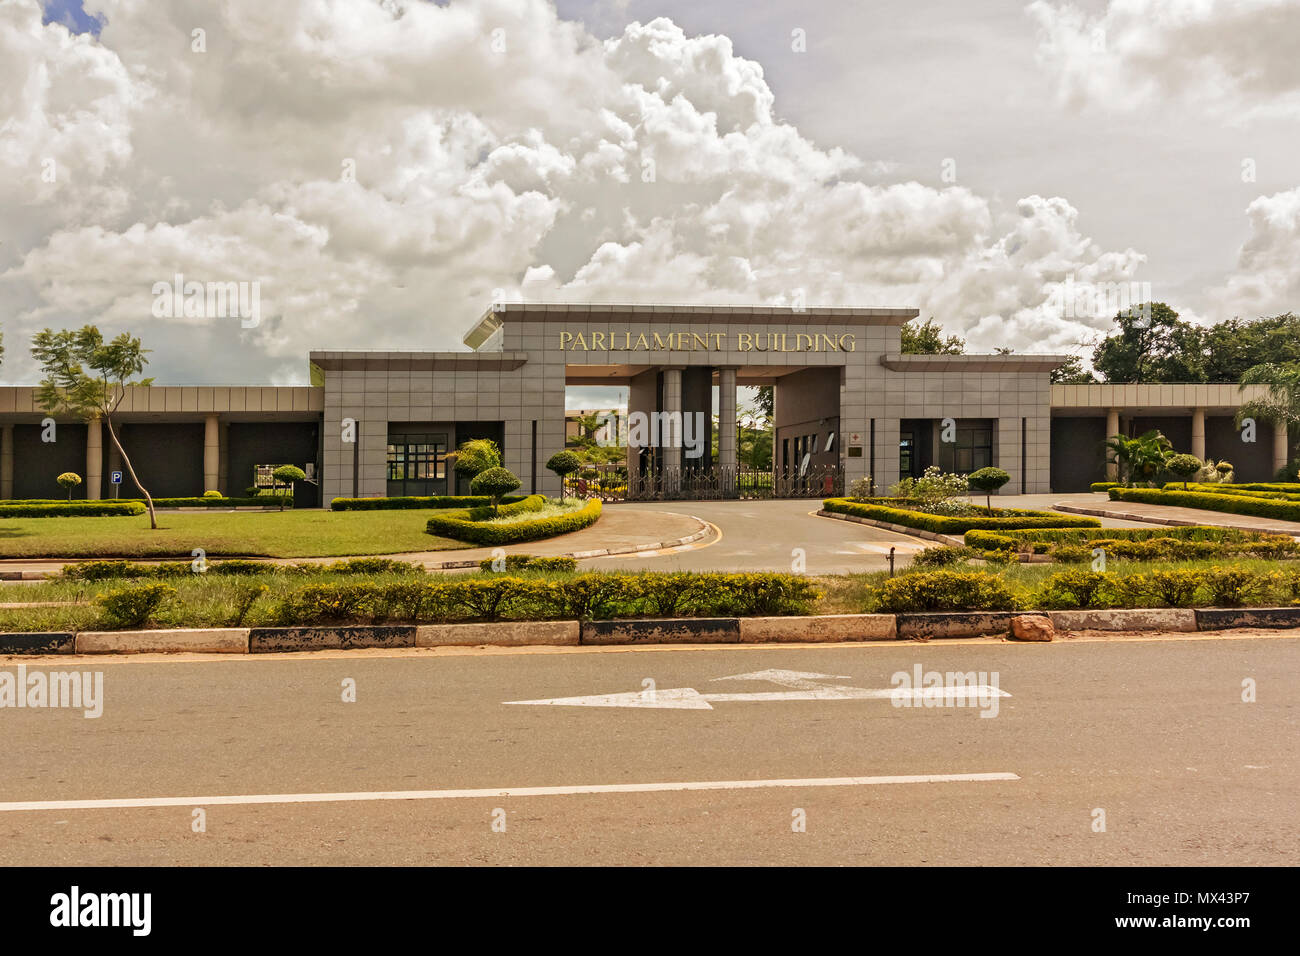 Lilongwe, Malawi - March 29, 2015: View at the Parliament building in Lilongwe the capital city of Malawi. Stock Photo